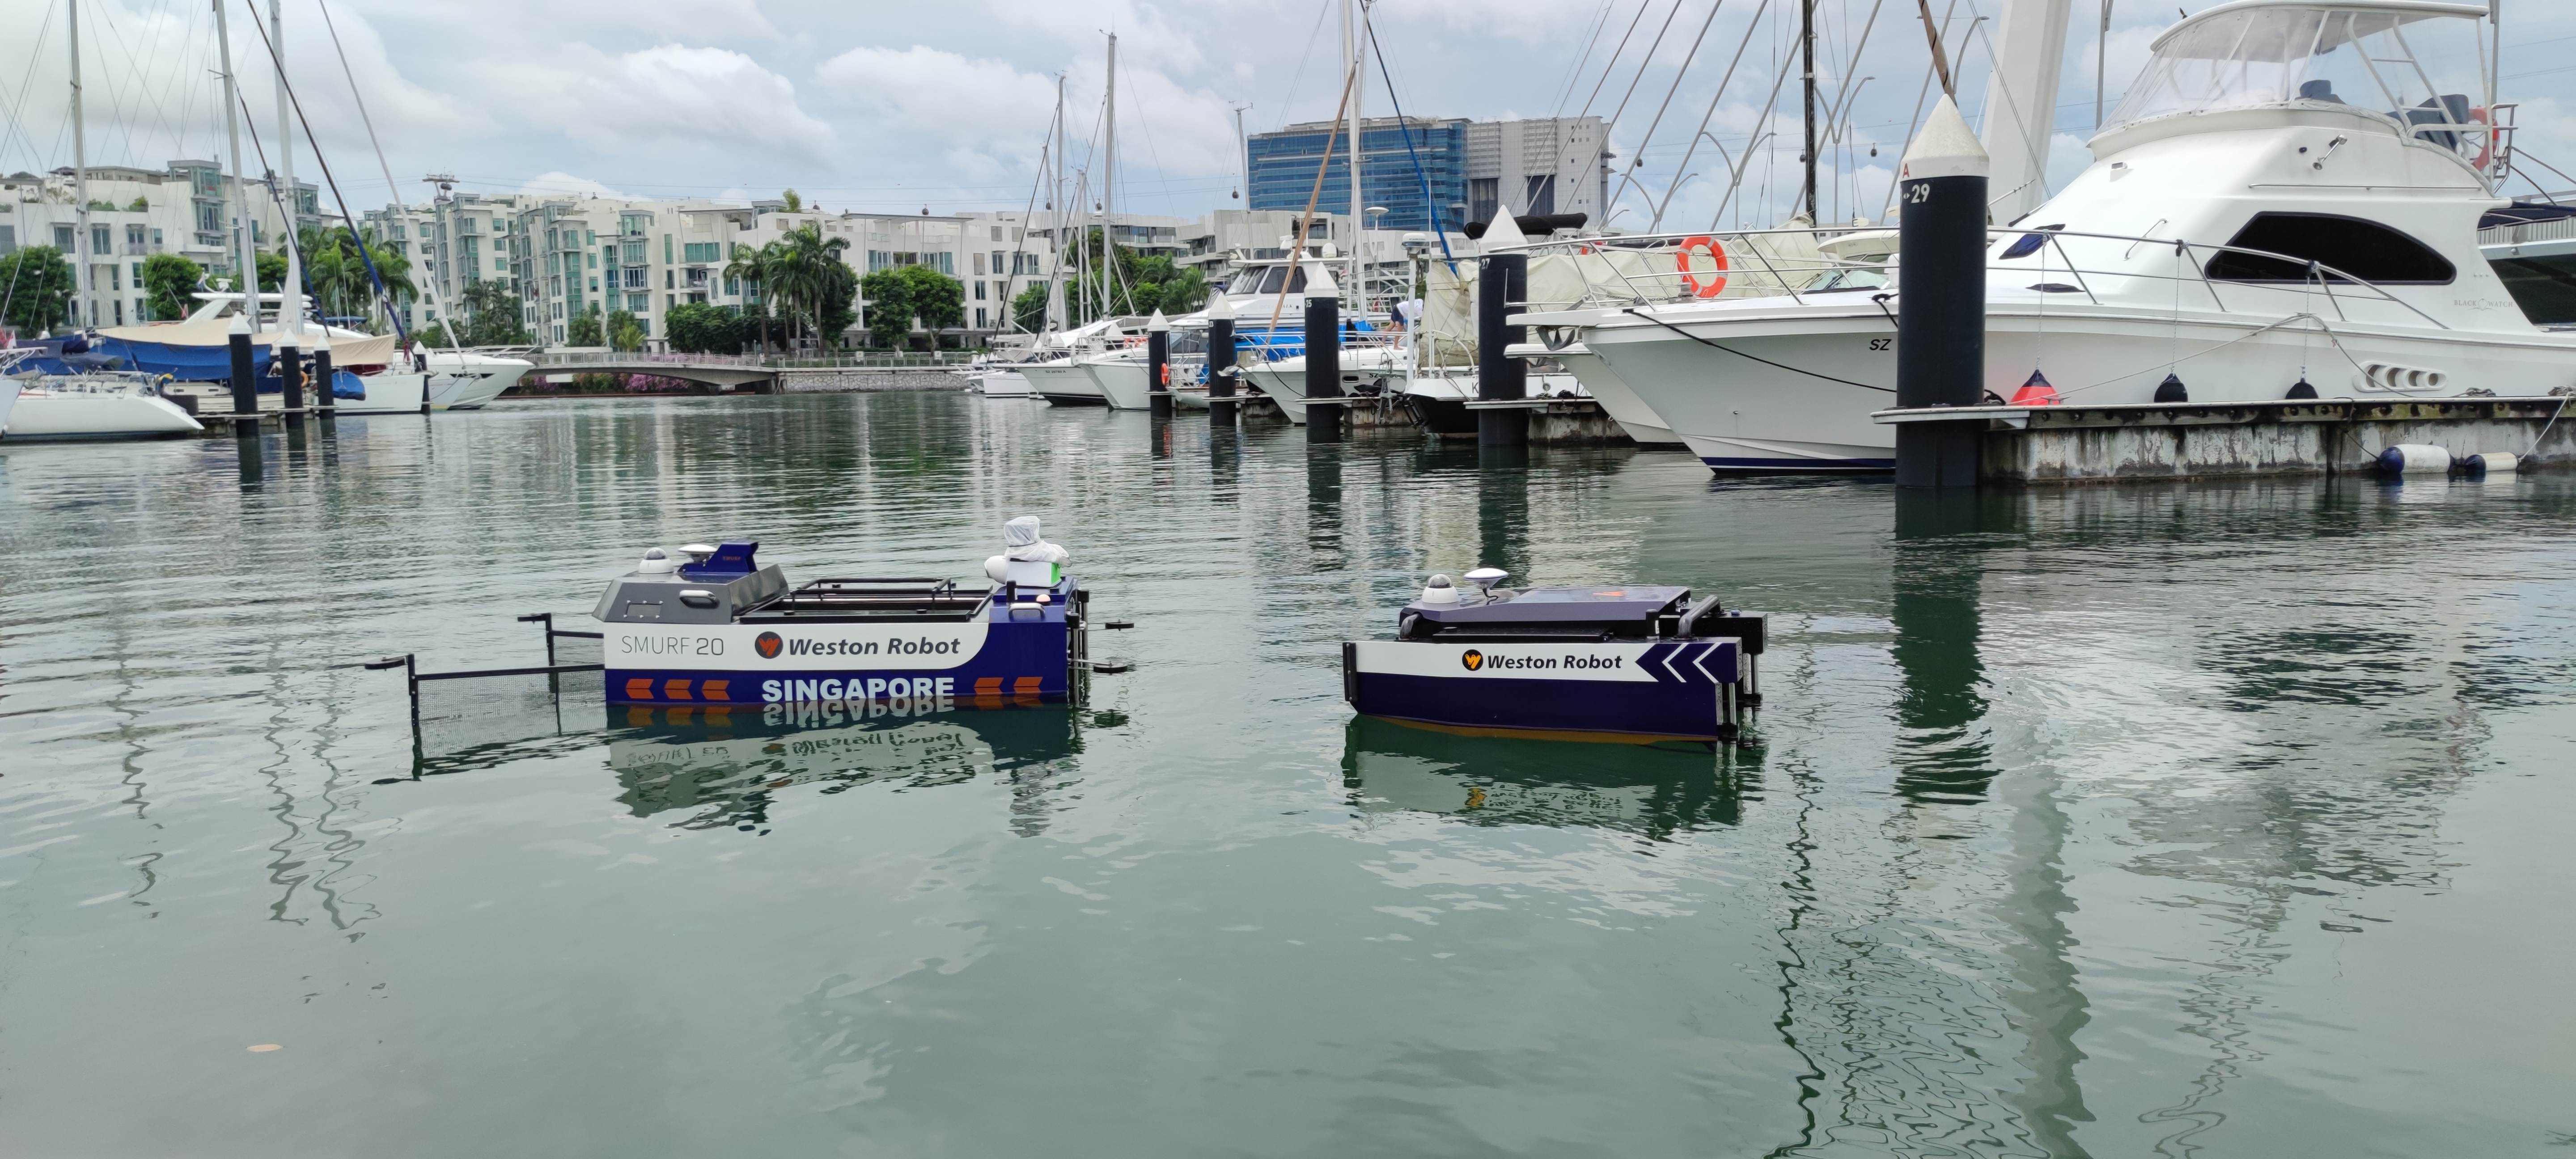 The 5G-enabled SMURF is a battery-operated USV by Weston Robot and M1 that can collect garbage, monitor water quality, collect water samples, and even patrol a body of water.